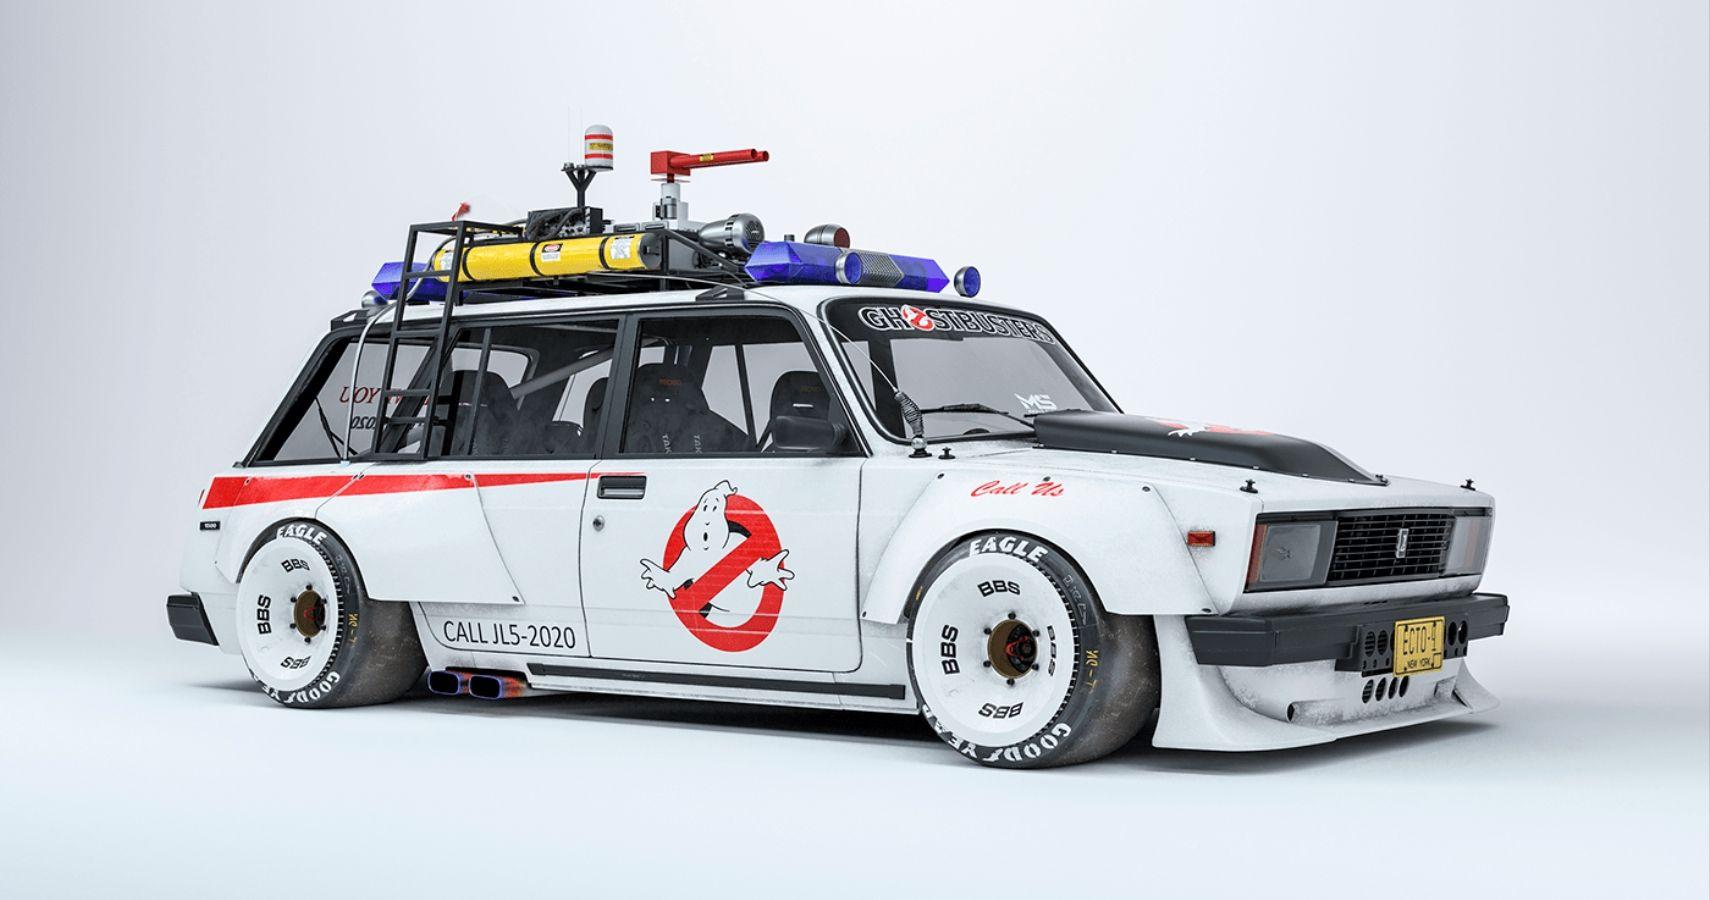 Lada ghostbuster rendering featured image